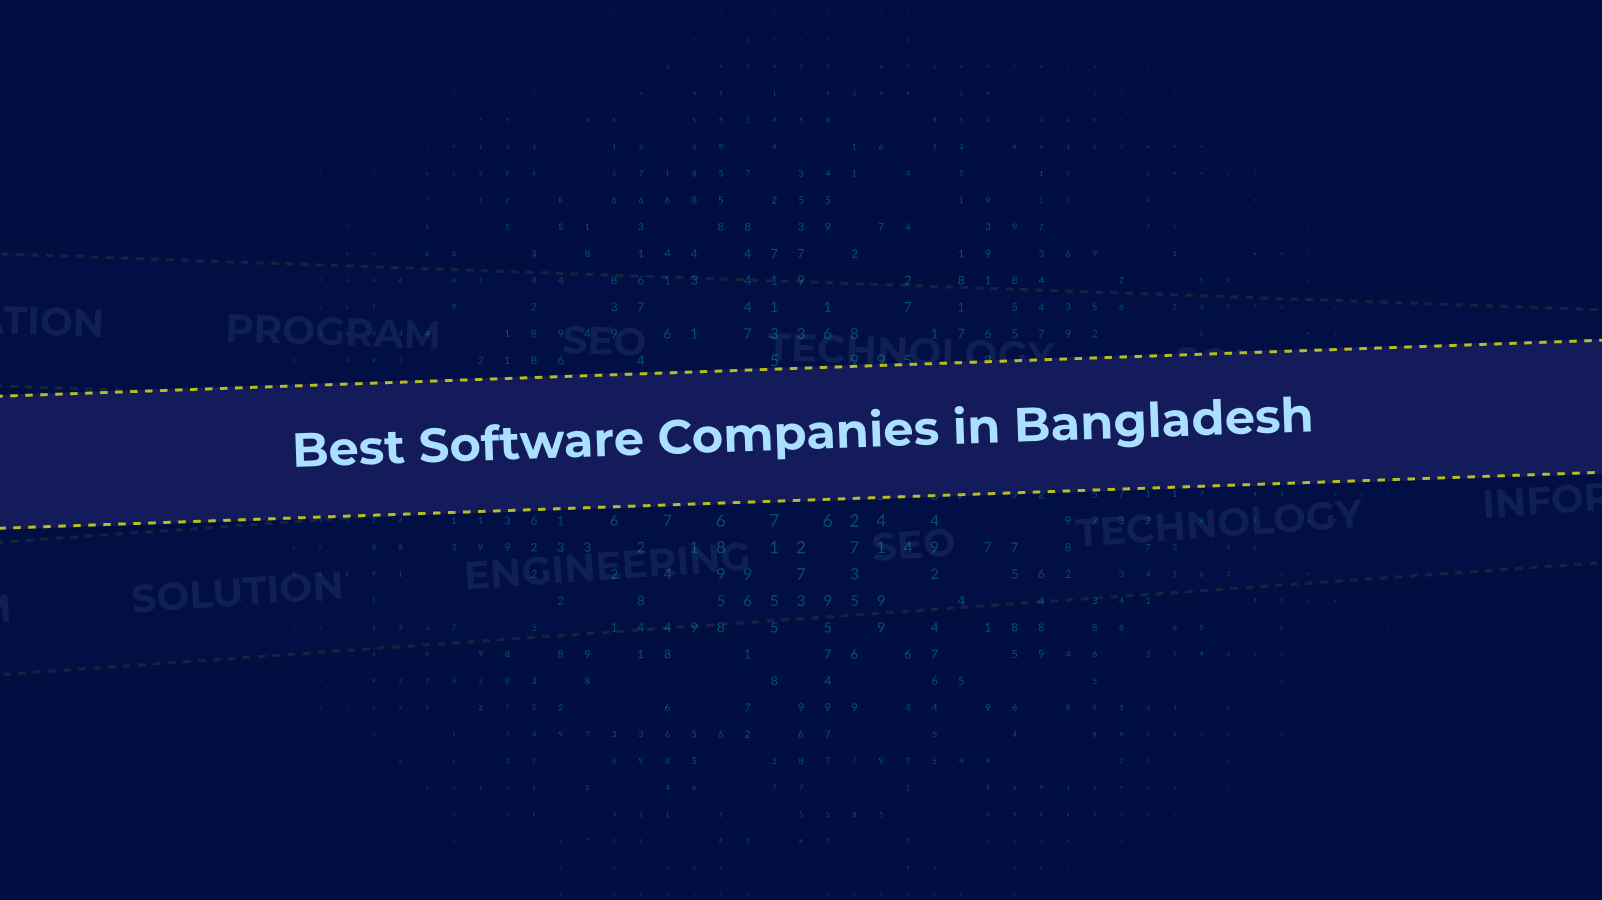 An image mentioning best software companies in Bangladesh